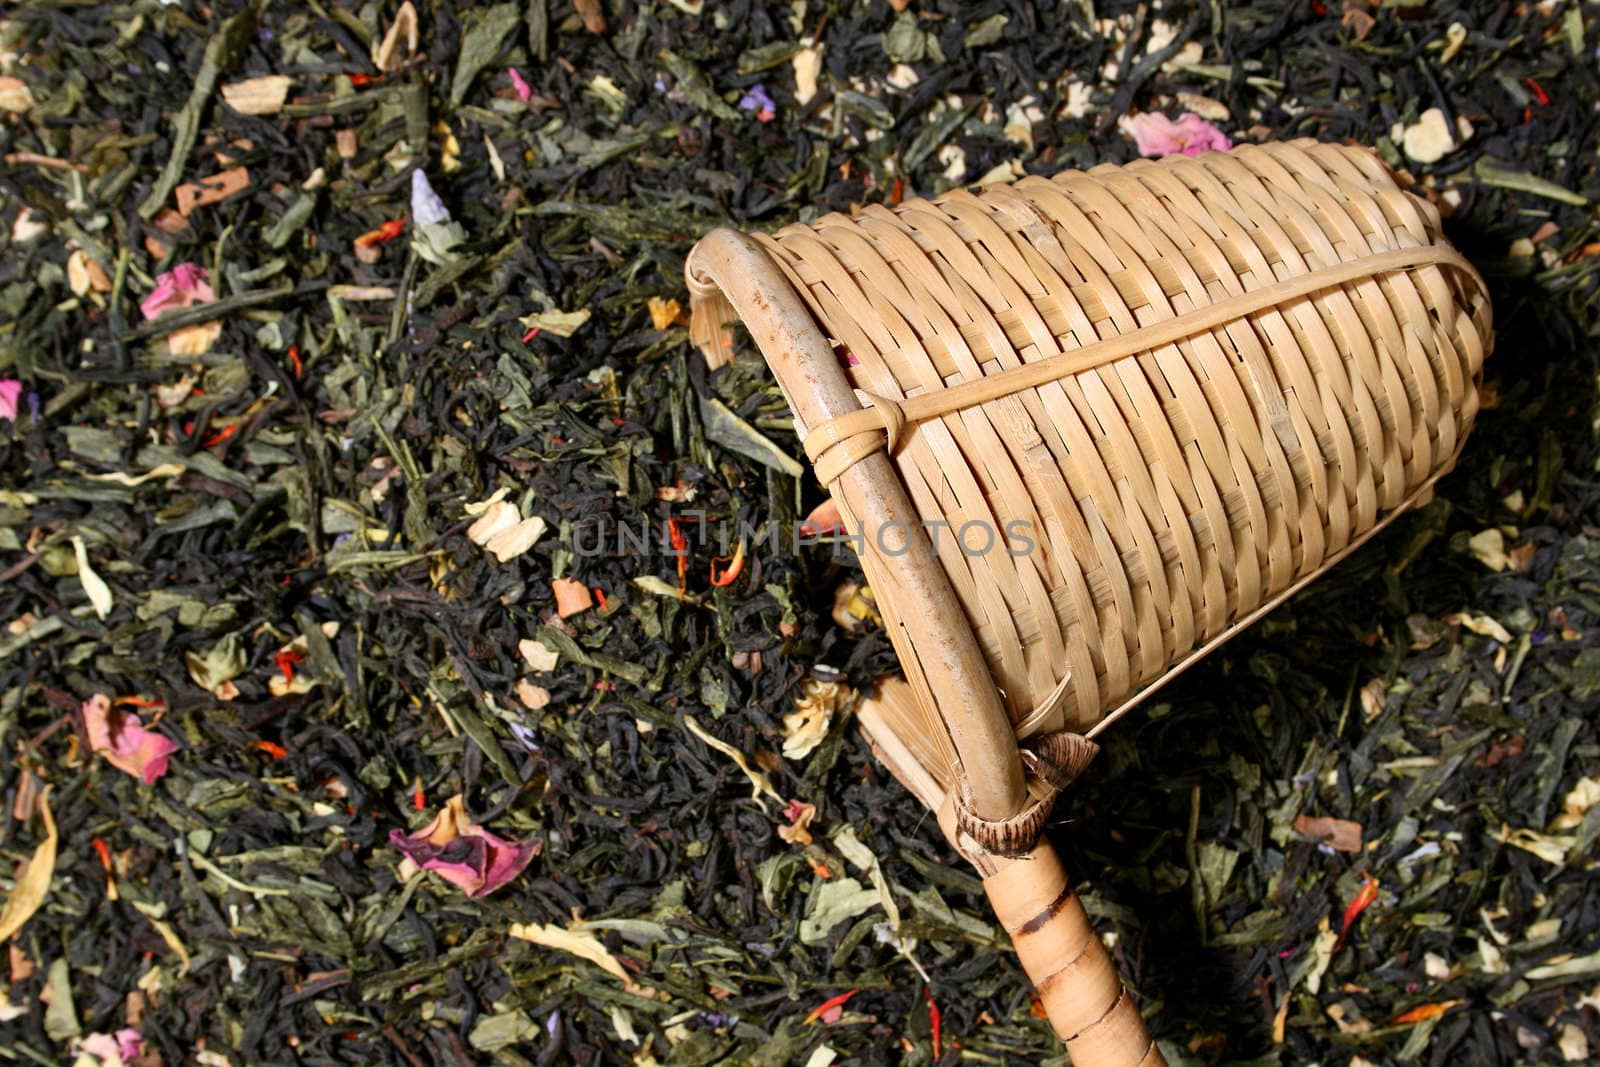 Wicker scoop over a tea leaves background, more in my gallery